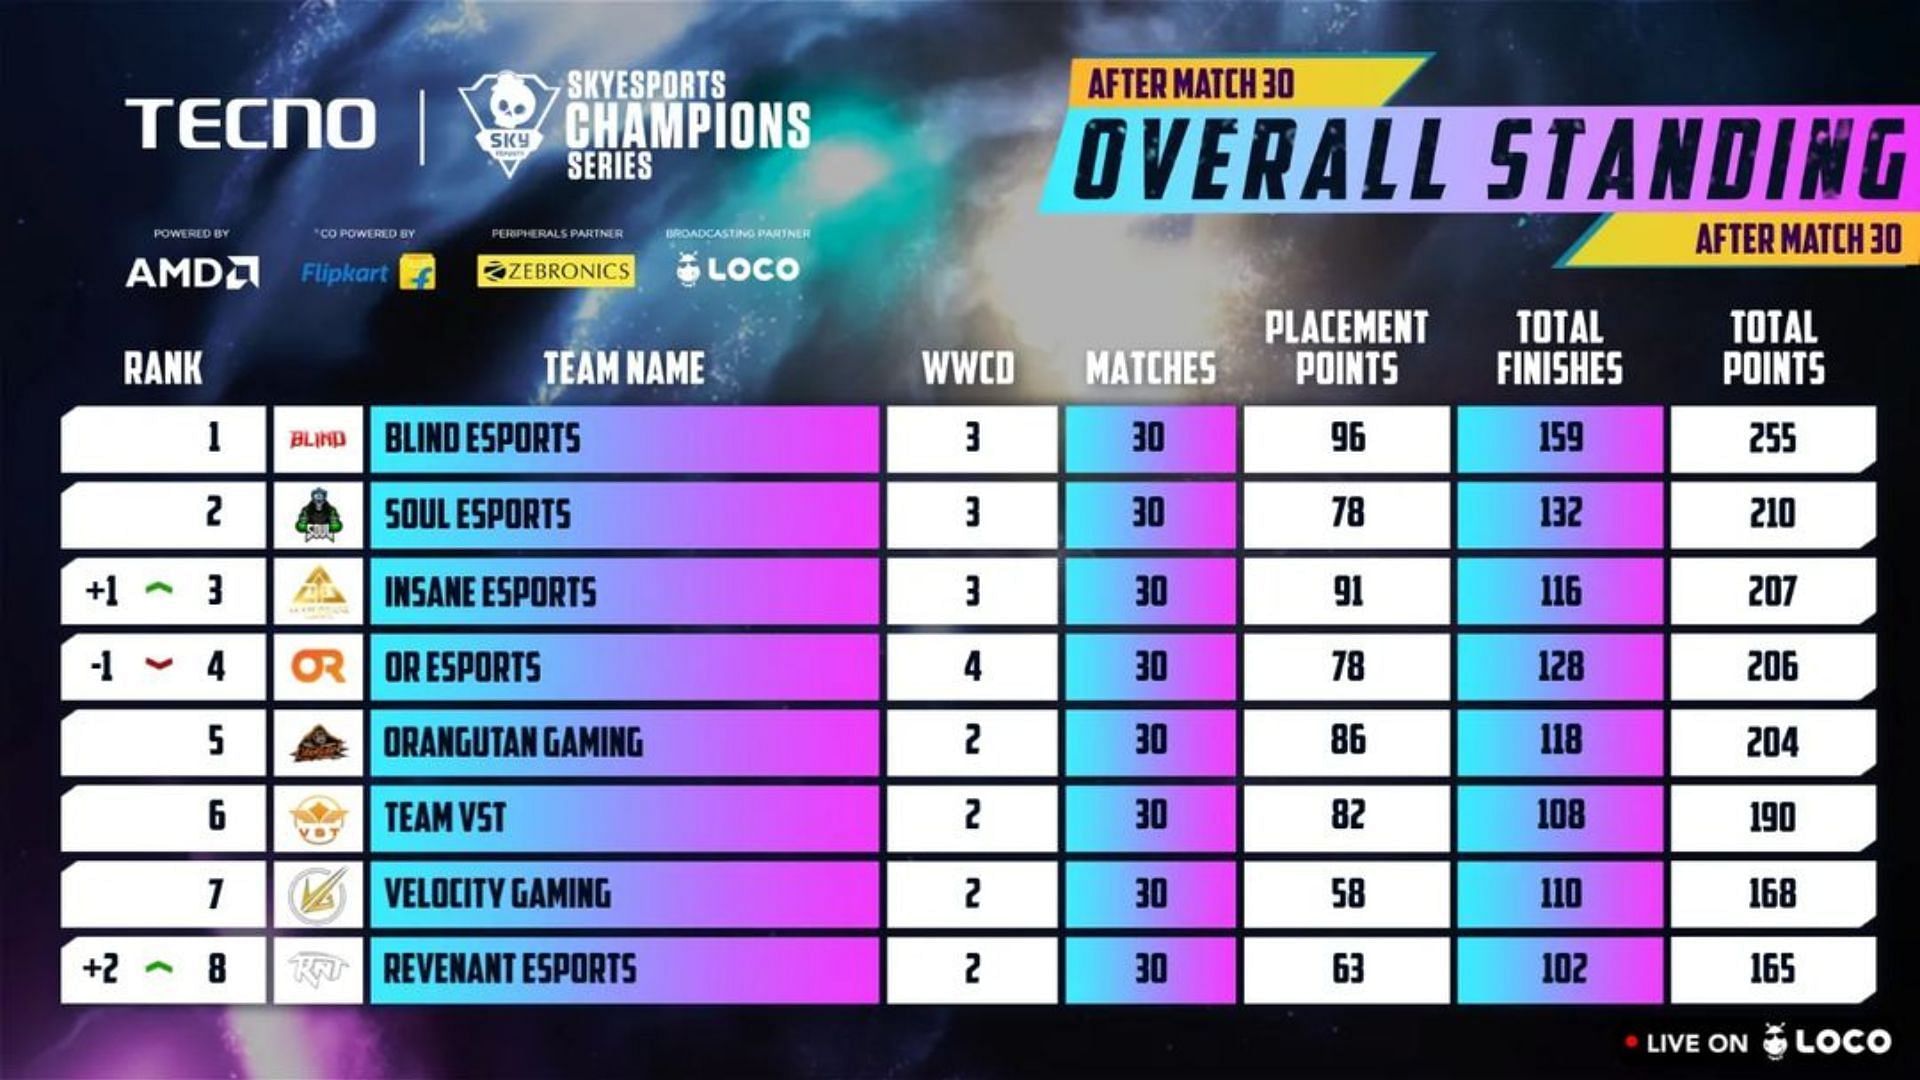 Blind Esports ranked first in Skyesports Champions Series Finals. (Image via Skyesports)